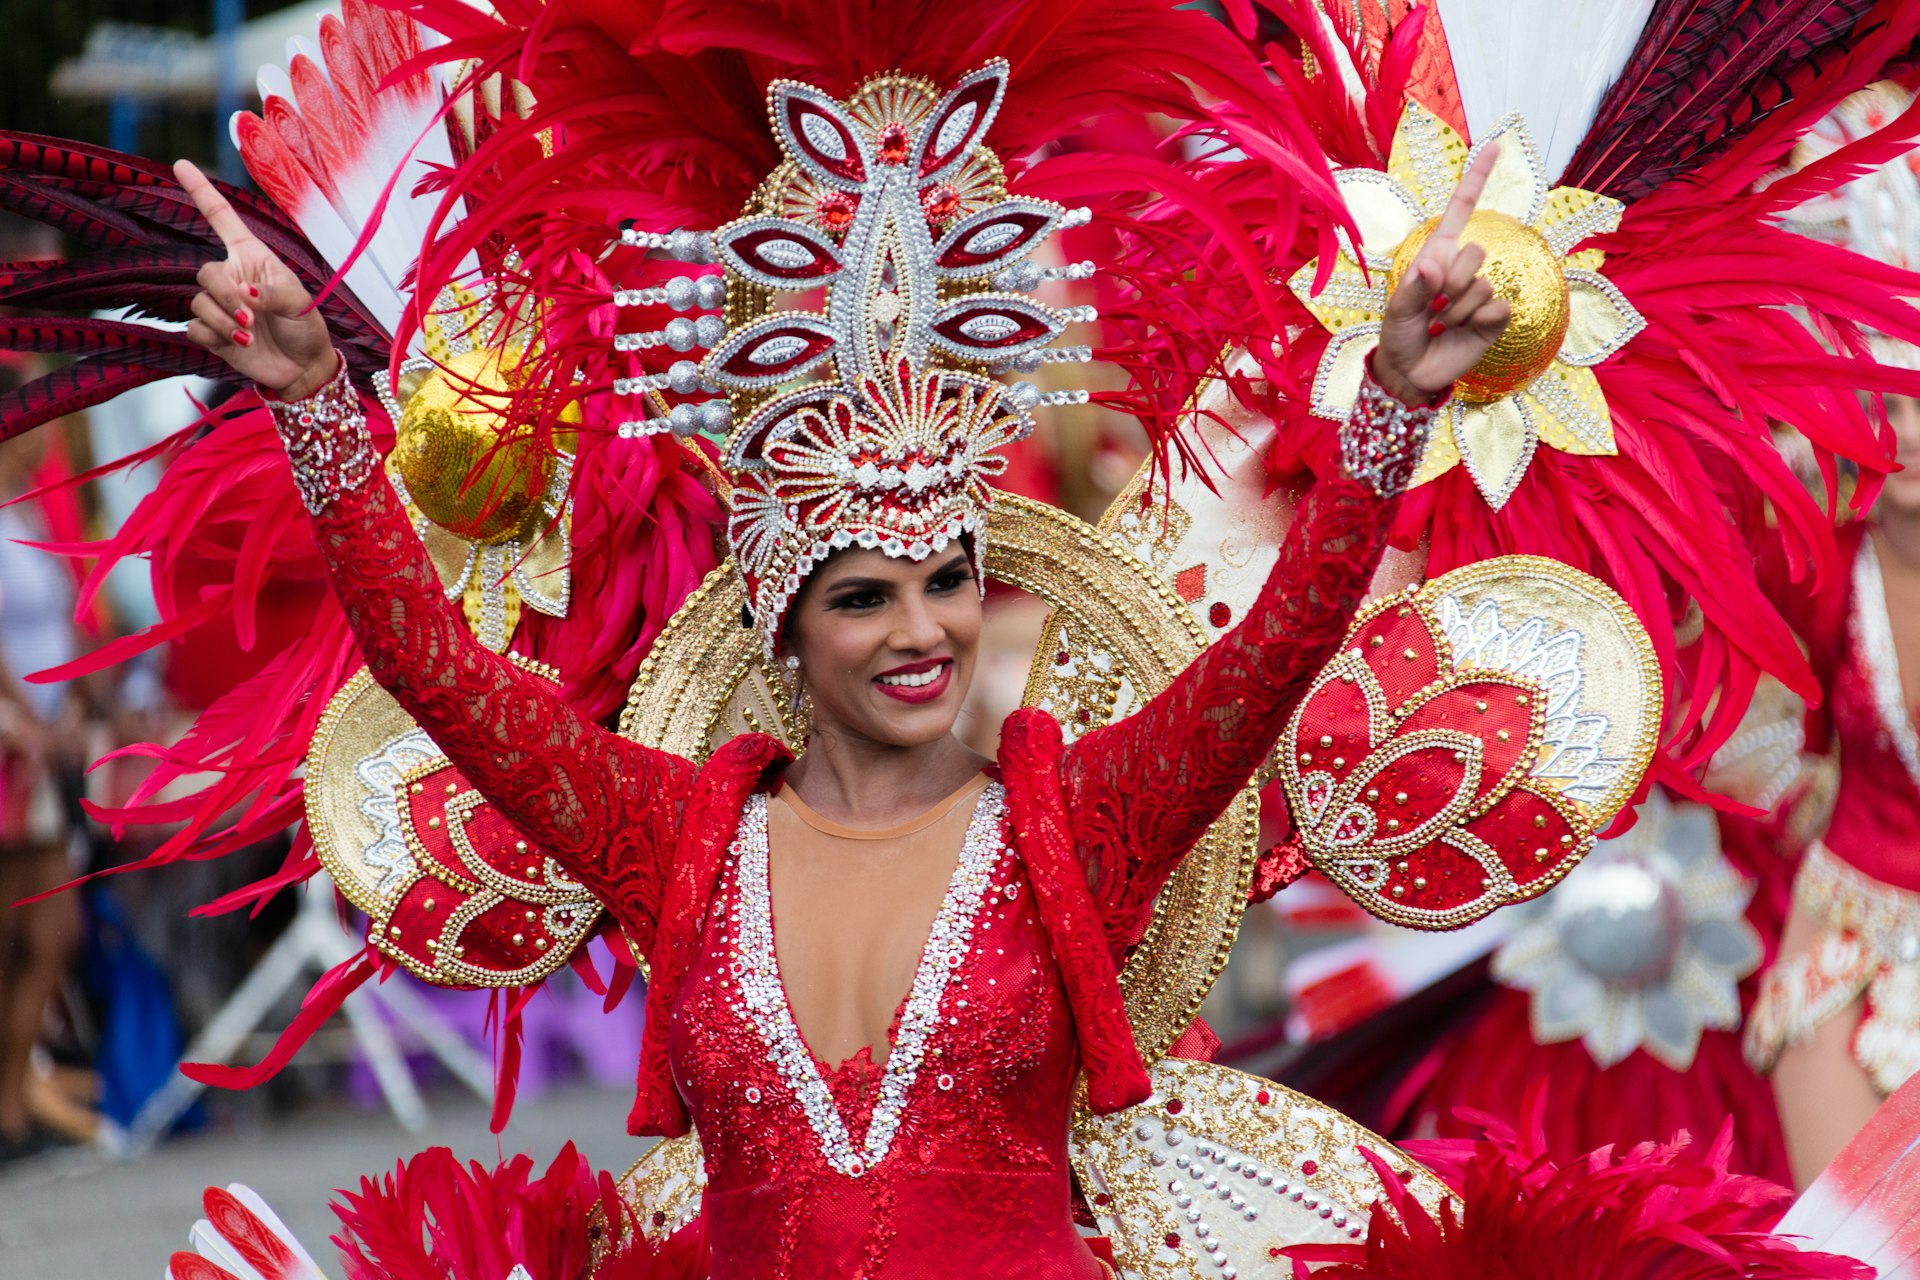 A women in a red costume performs in the carnival of Aruba in Oranjestad